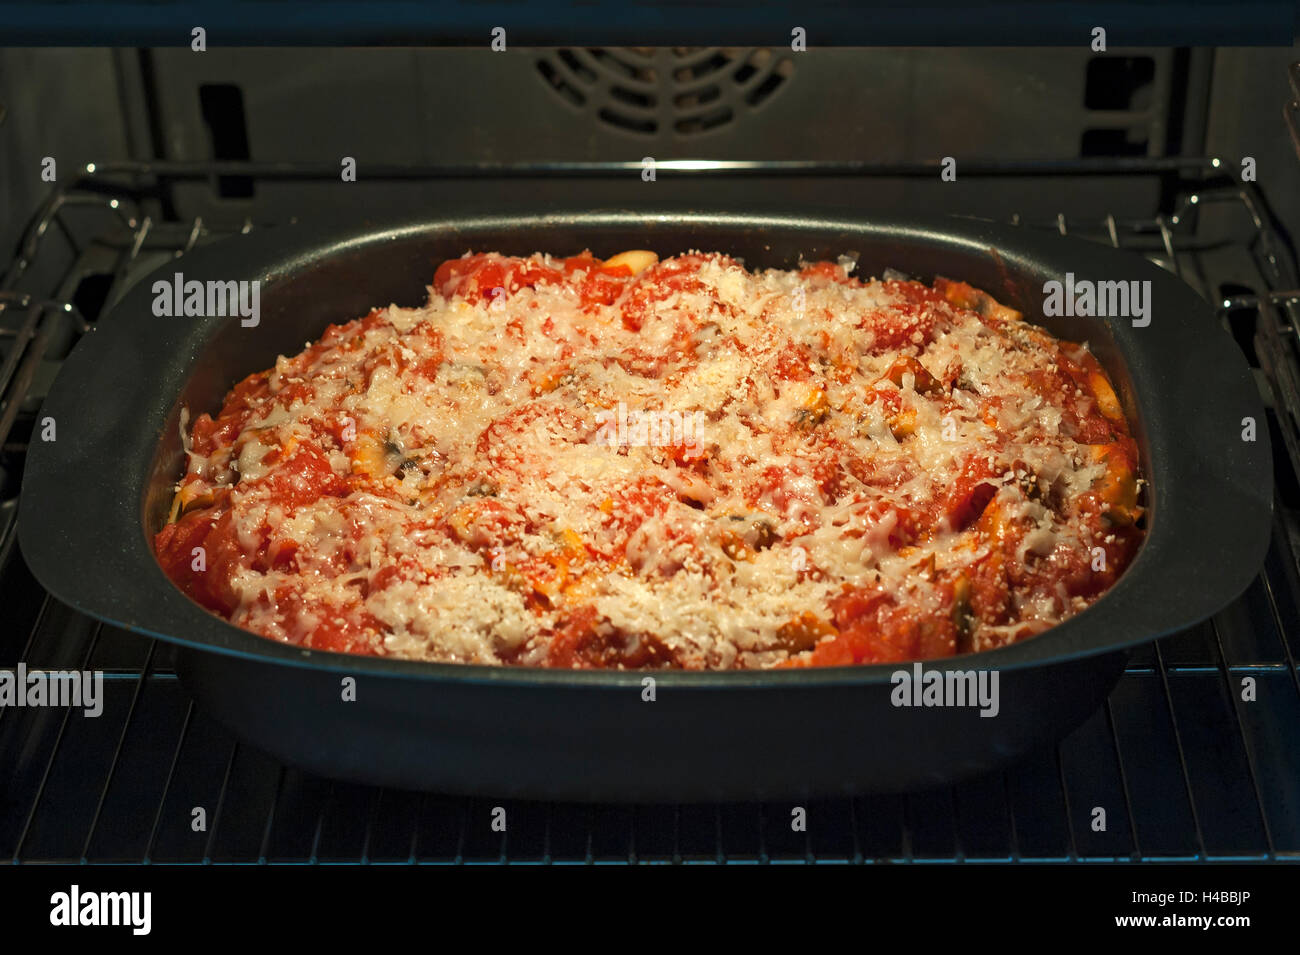 Baked pasta dish with tomato and cheese, in a pan in the oven Stock Photo